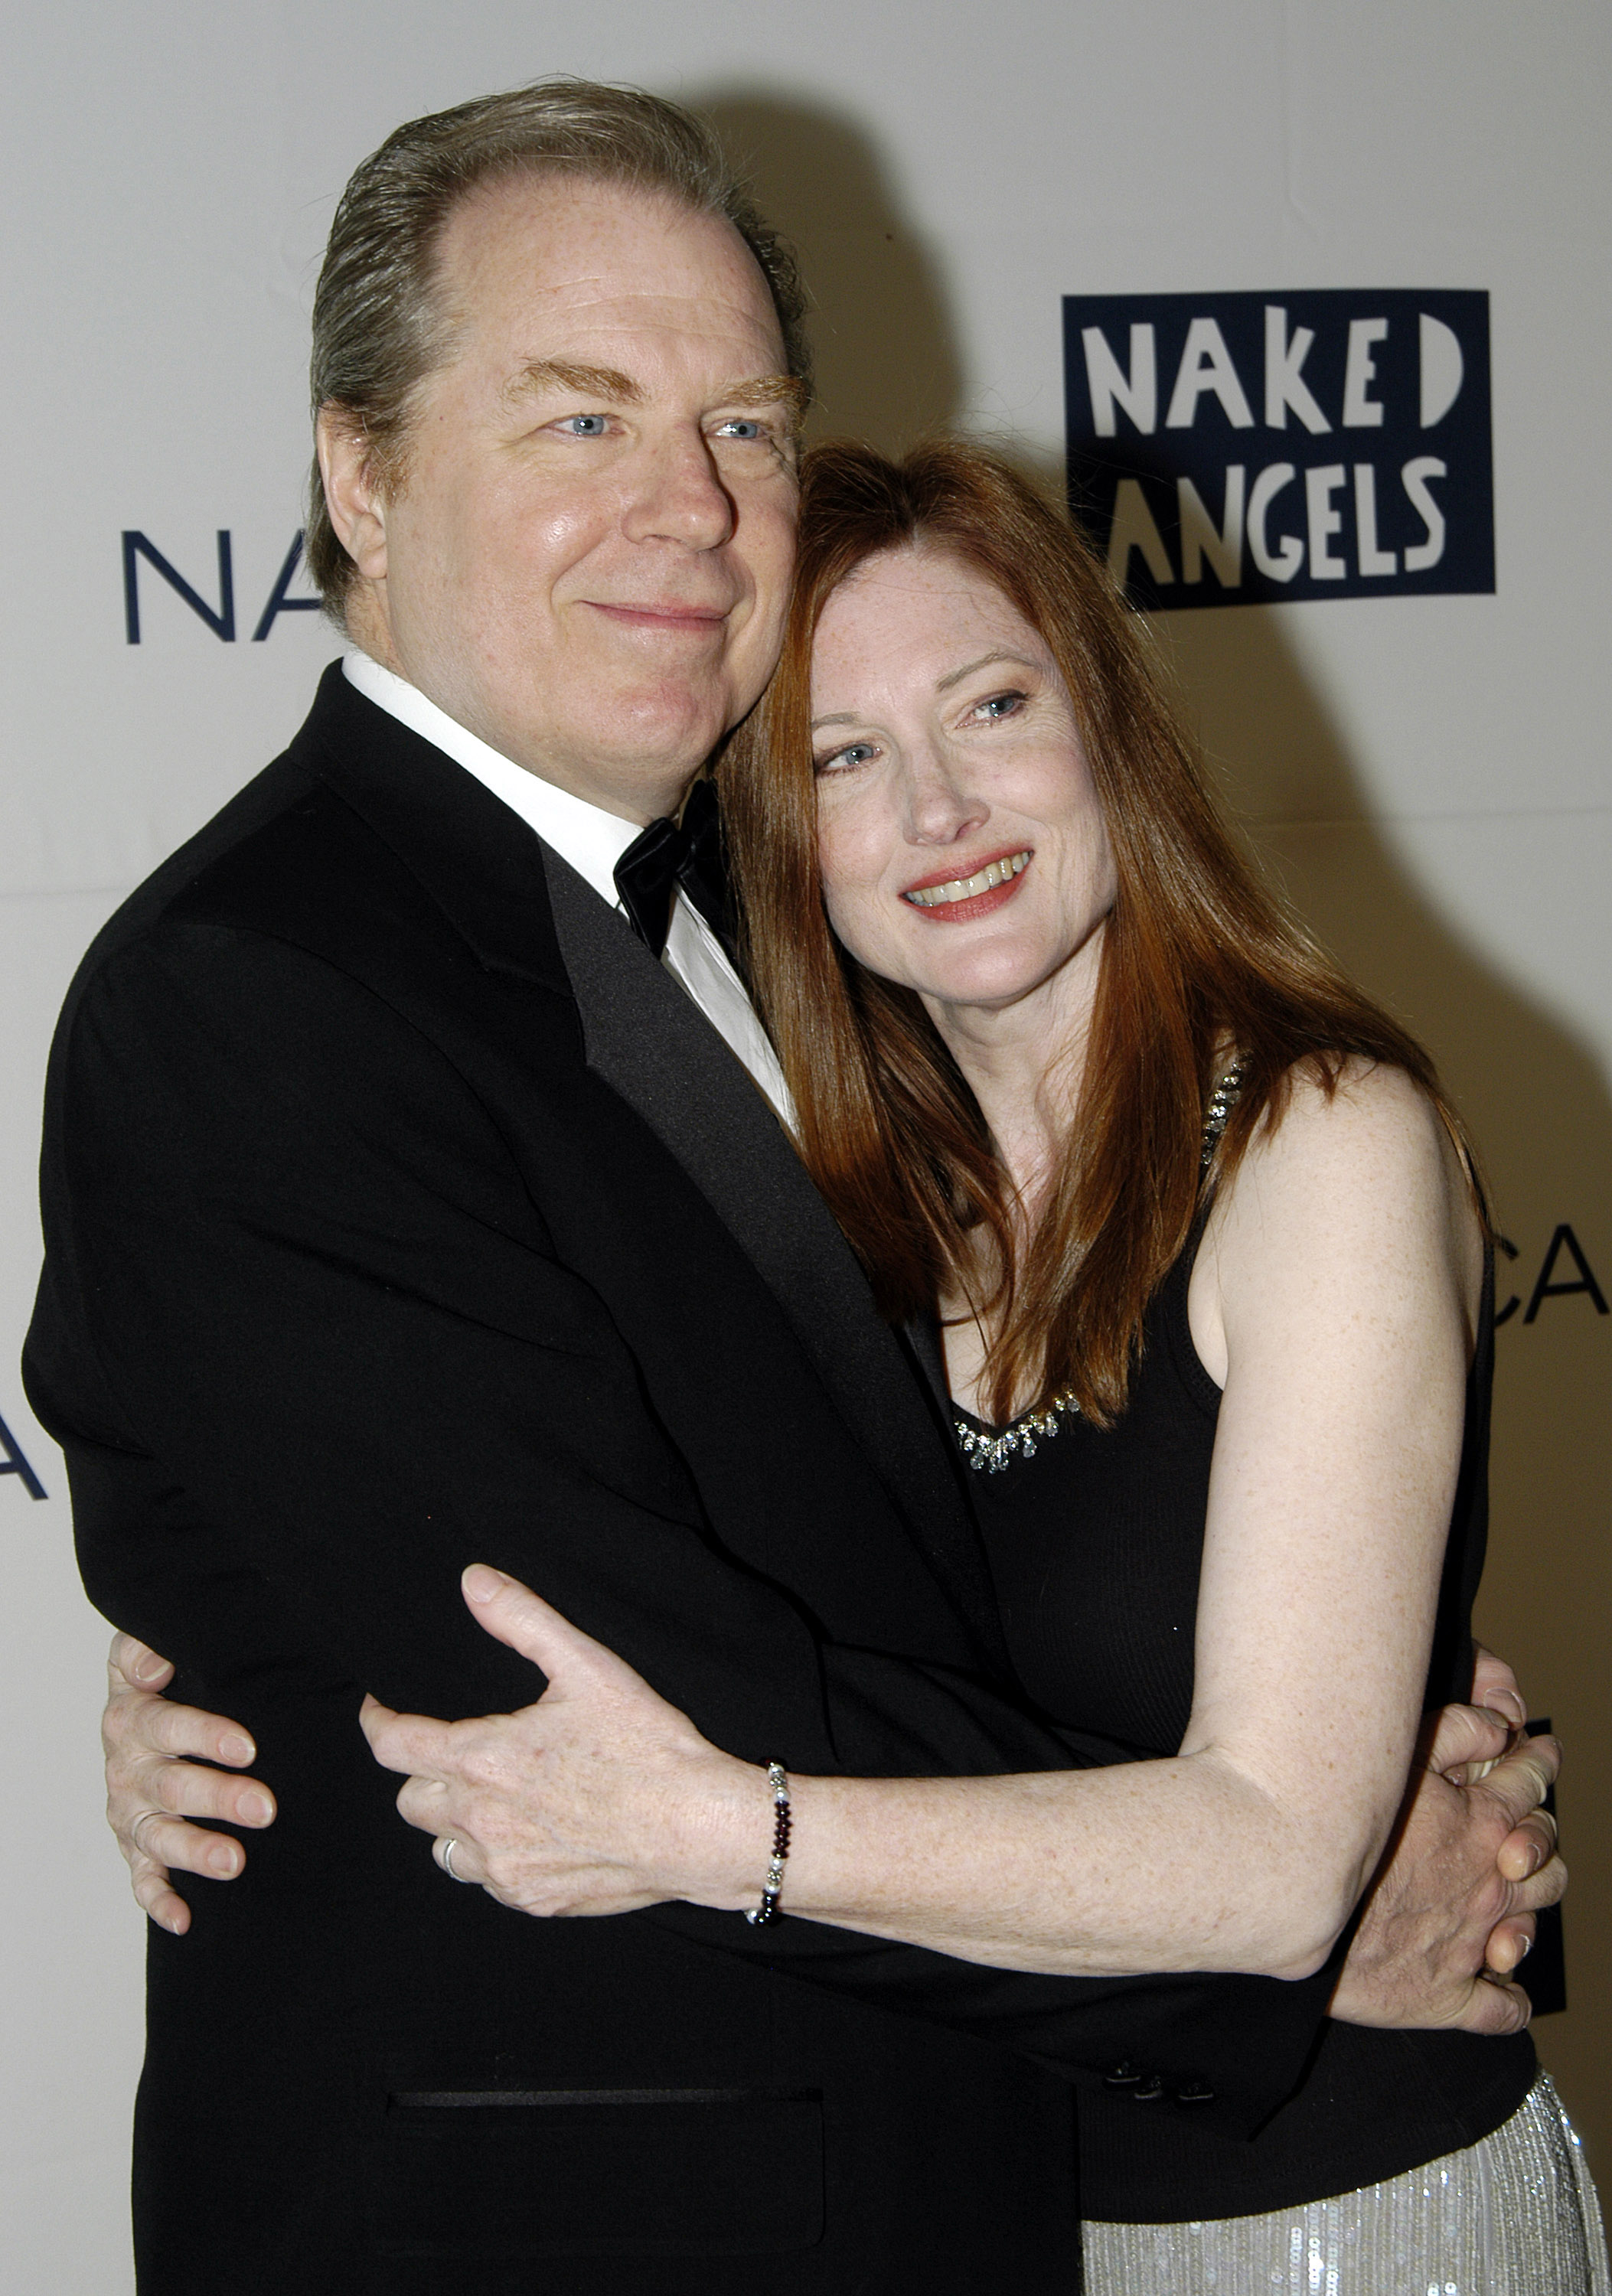 Actor Michael McKean and his wife Annette O'Toole during "Fish Fry: An All-Star Roast of Fisher Stevens" at Puck Building on May 23, 2005 in New York City, New York | Source: Getty Images